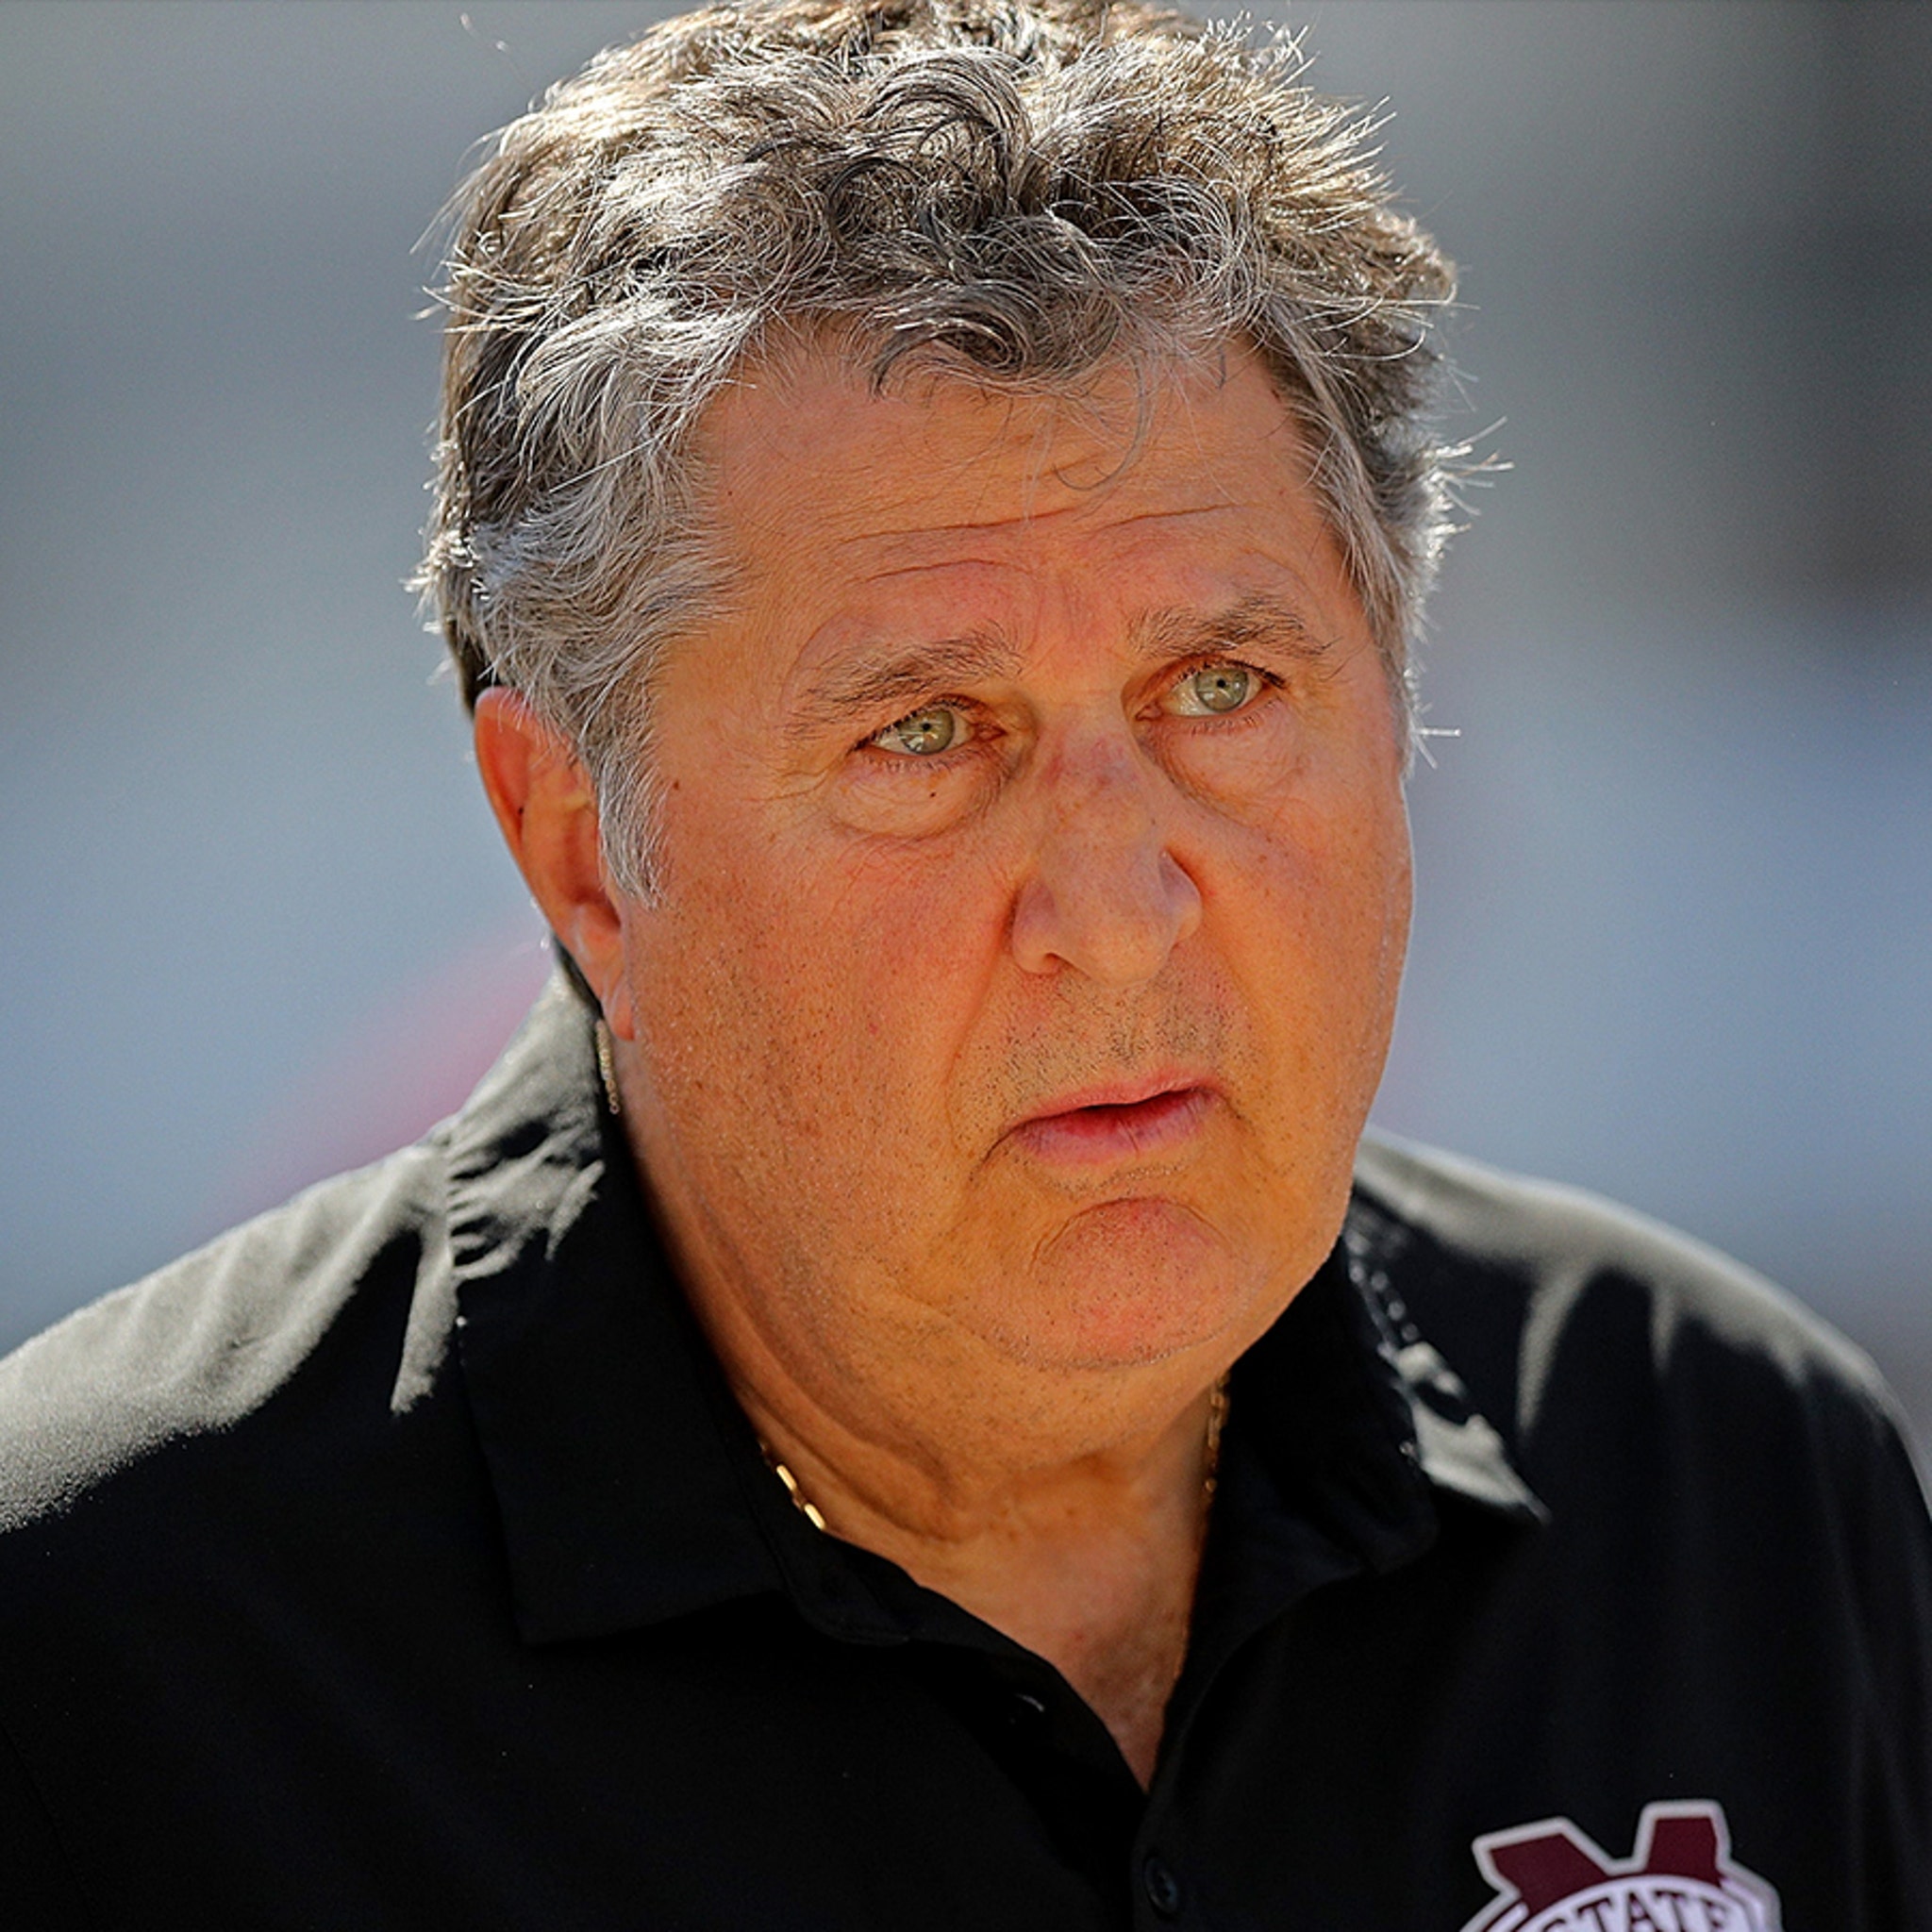 Mississippi St. Coach Mike Leach Hospitalized In 'Critical Condition'